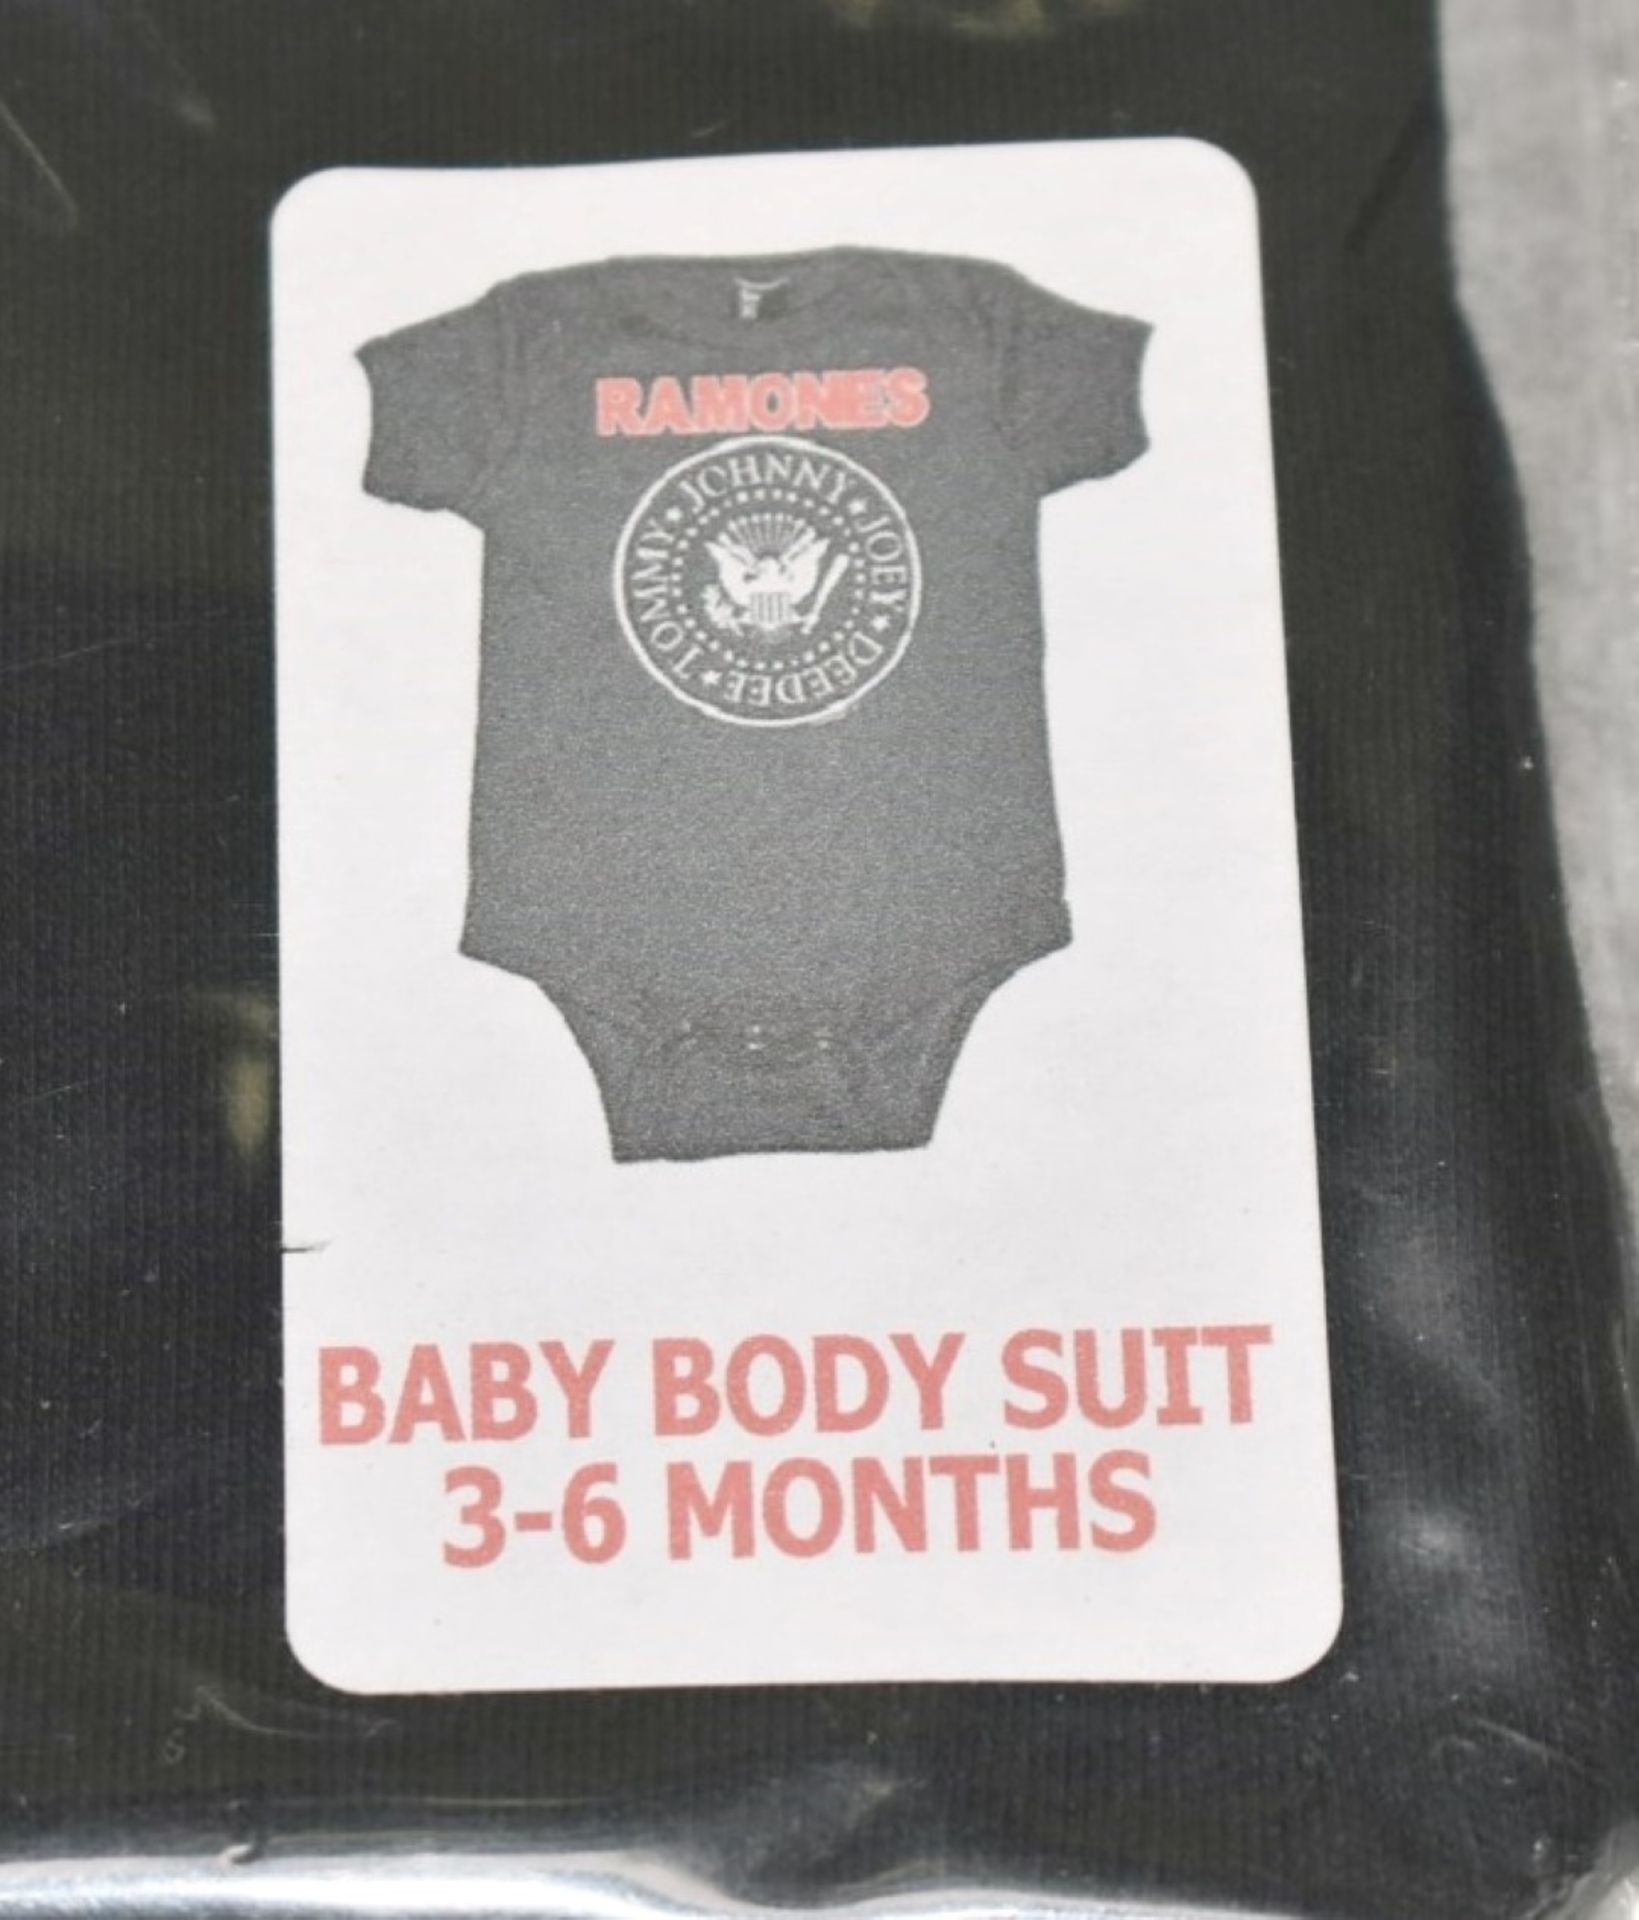 4 x Assorted Baby Body Suits - Features Johnny Cash and the Ramones - Size: 3 to 6 Months - - Image 4 of 8